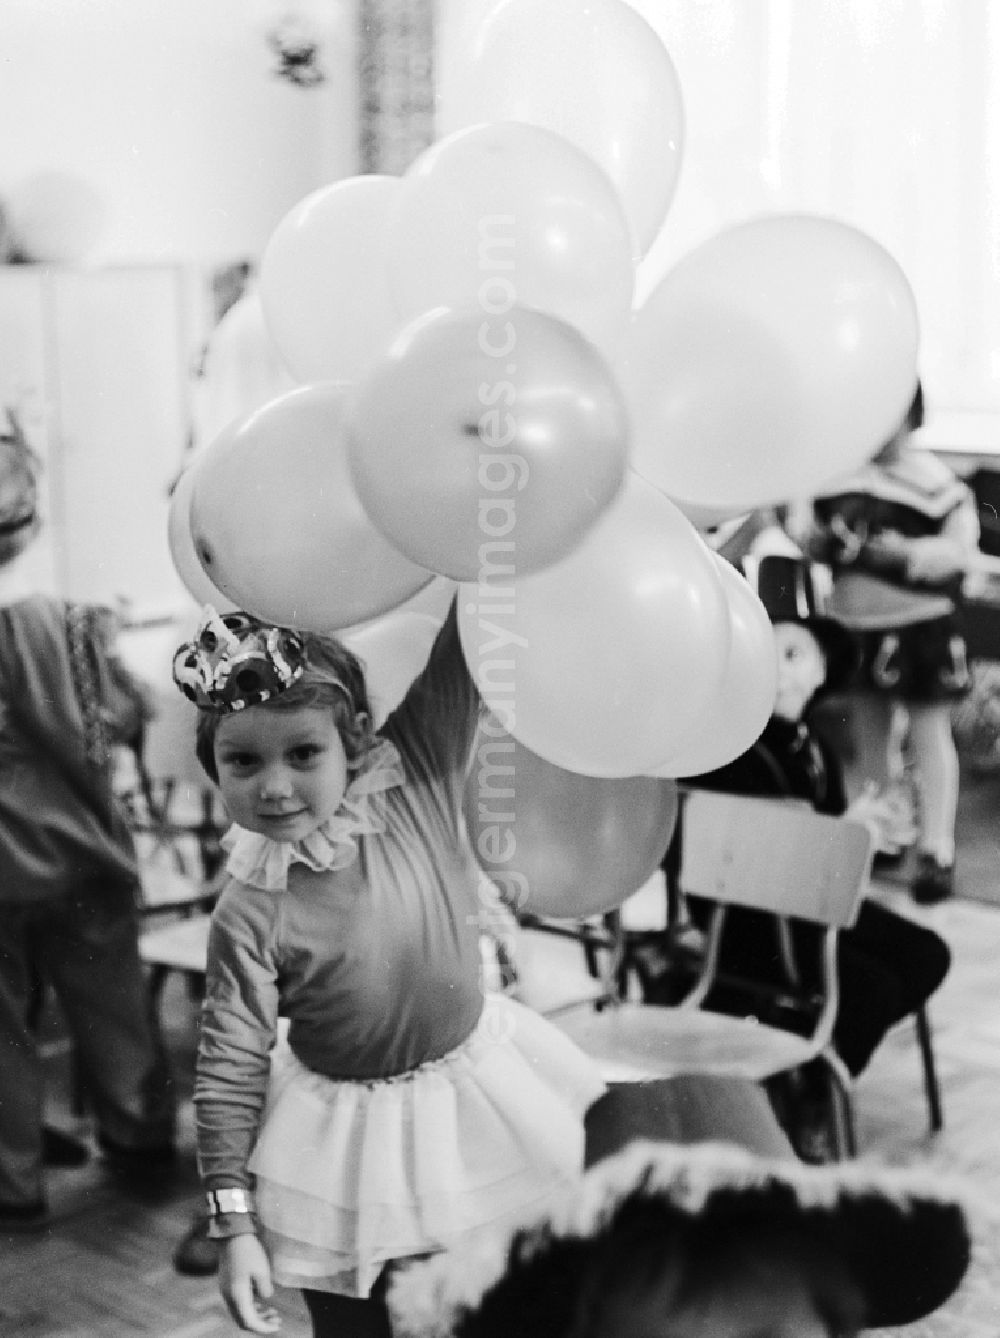 GDR picture archive: Berlin - Carnival in kindergarten in Berlin. Girl with balloons and dressed as princess